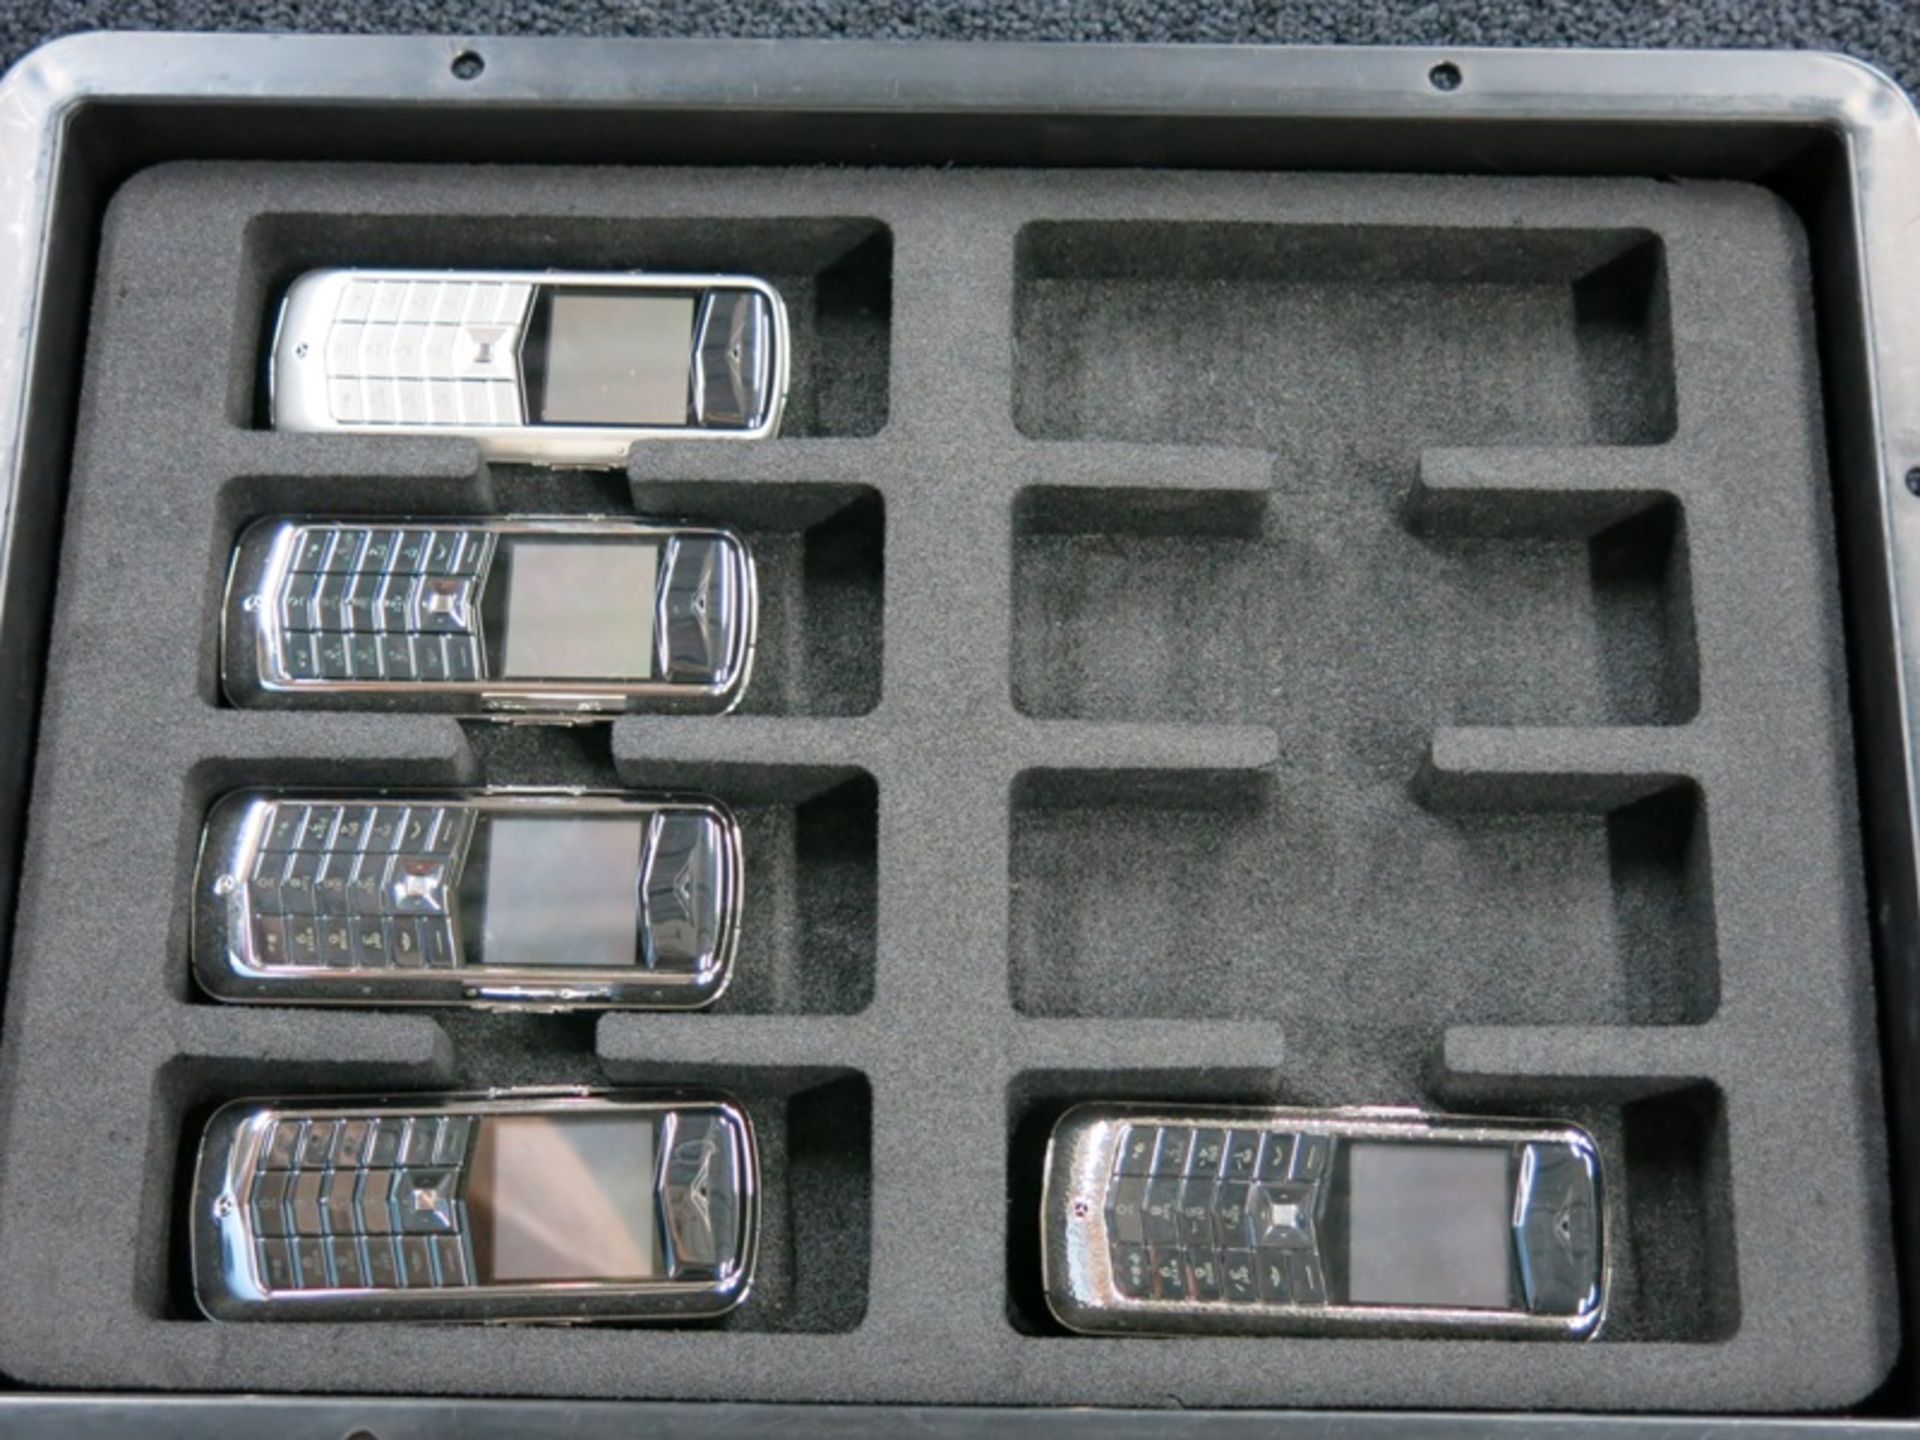 Archive Collection of 49 Vertu Constellation Classic Phones - Image 5 of 5